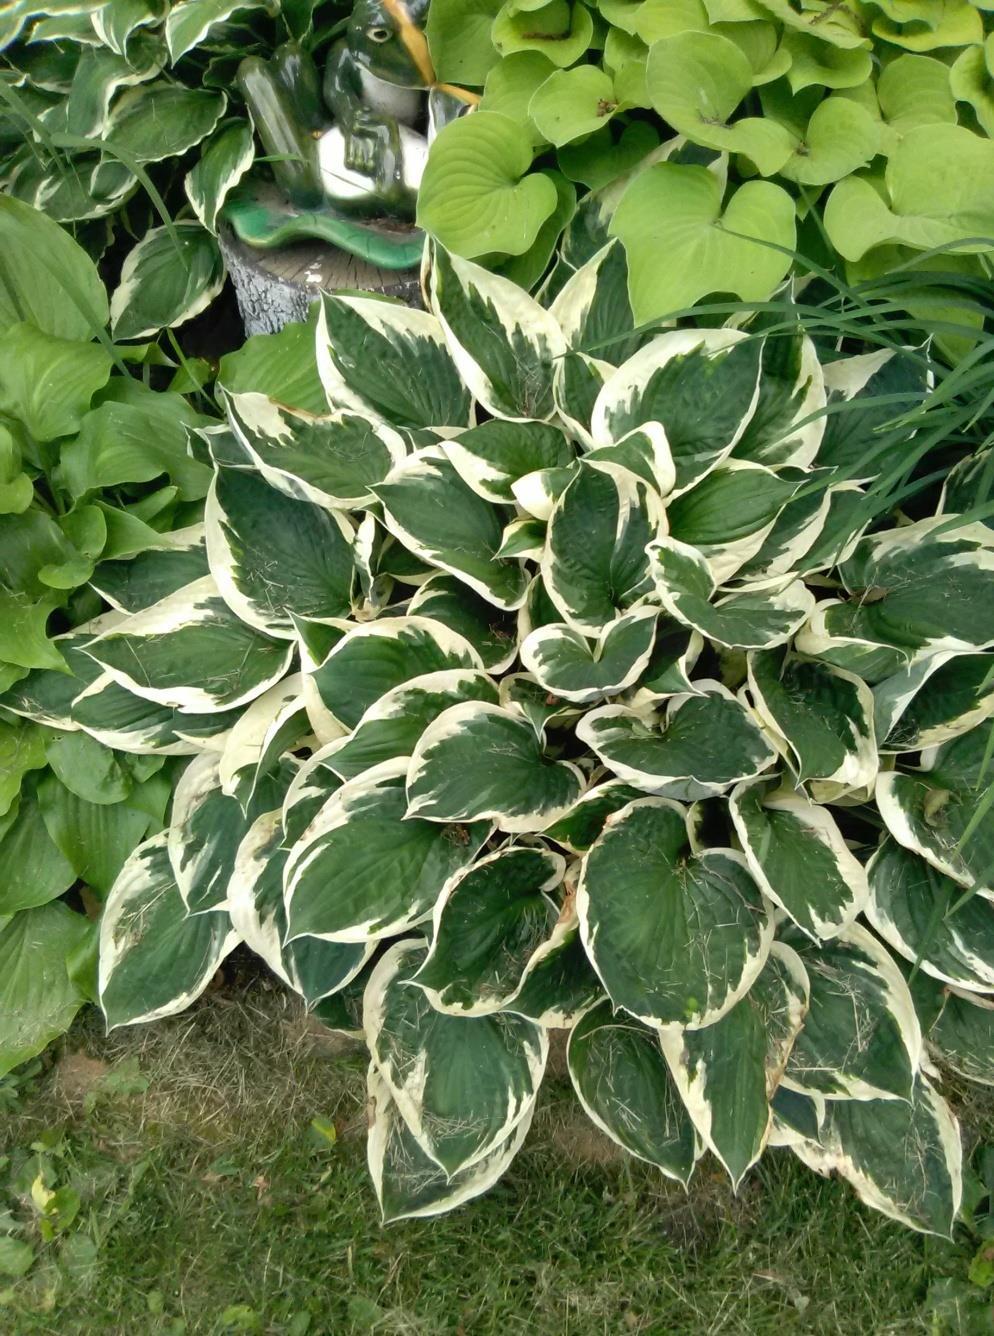 H. Patriot Leaf Size Medium to large Clump size 2 h x 4 ½ w Leaf edges get whiter as